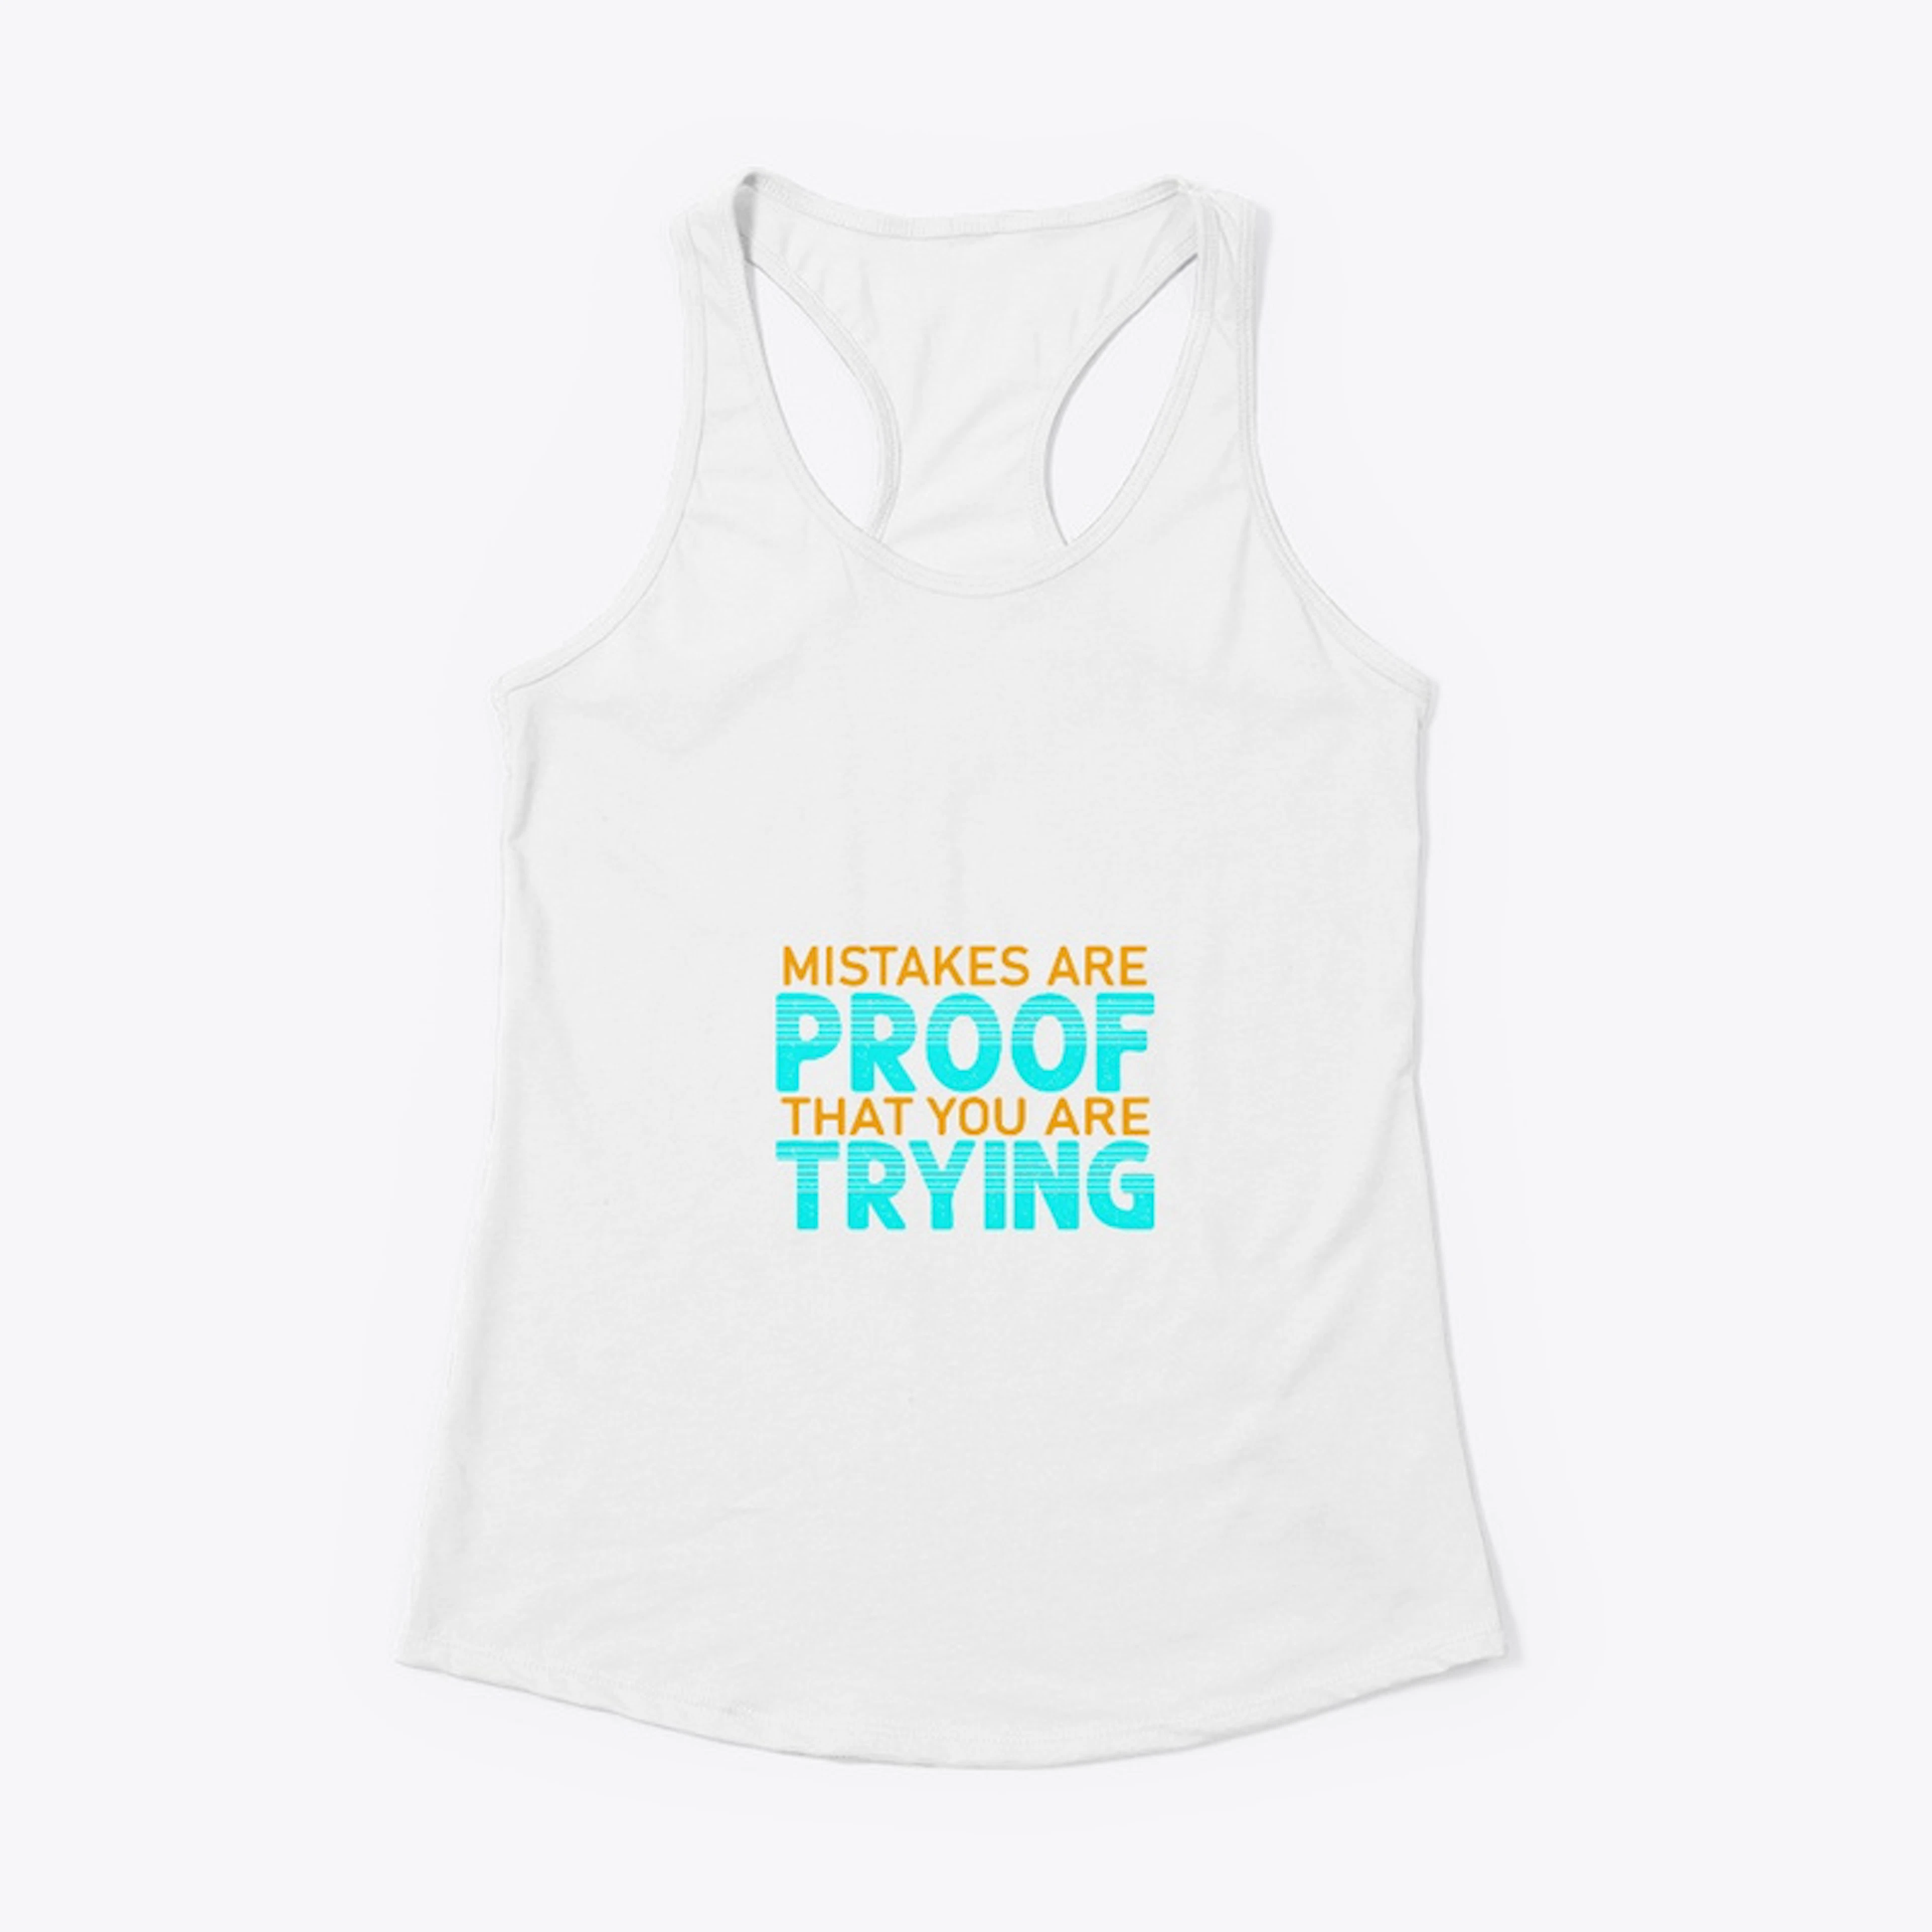 Mistakes are proof Tee